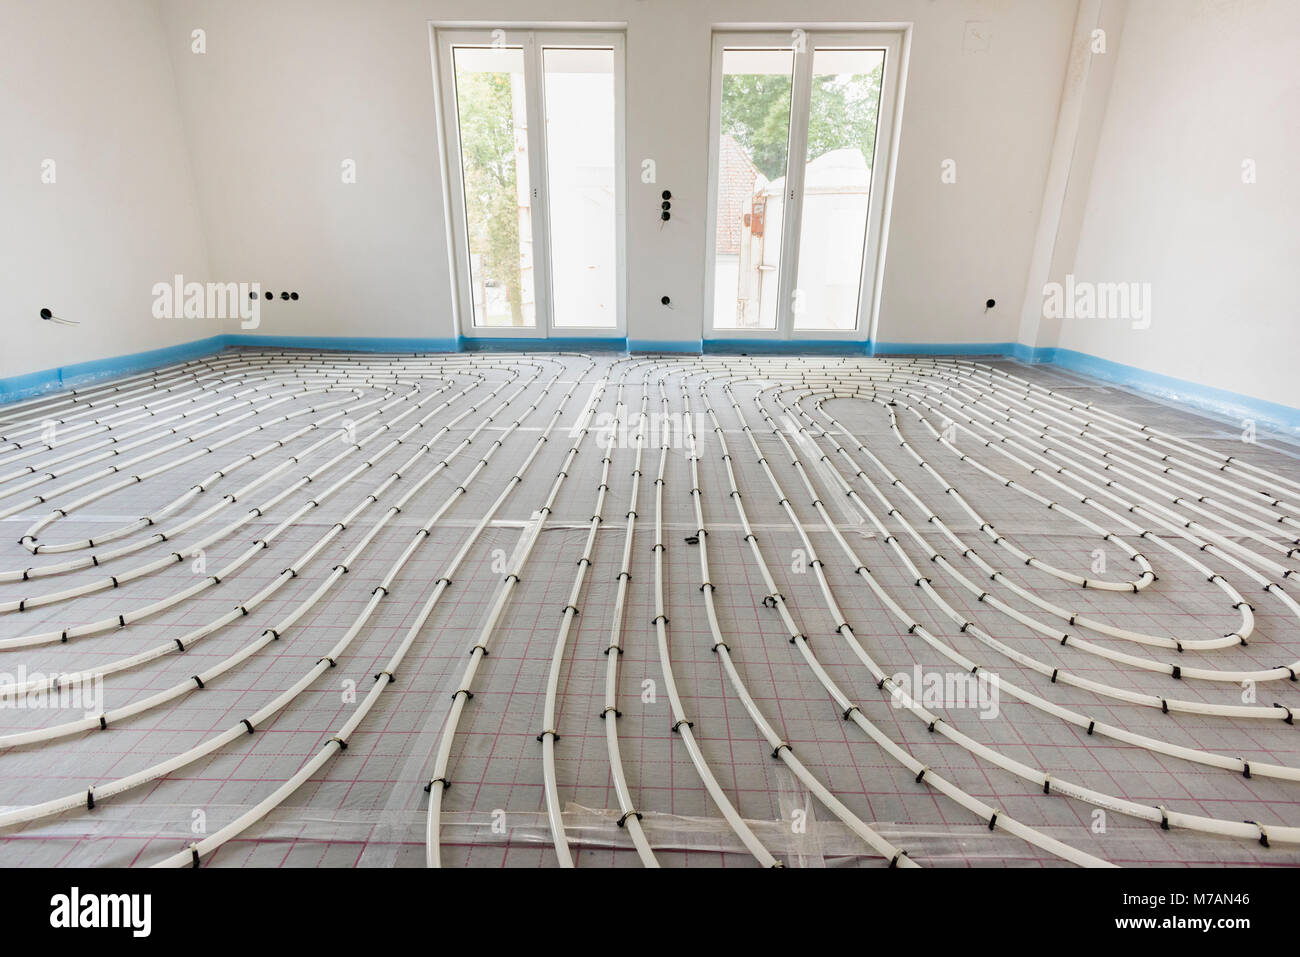 housebuilding with interior fixtures of the underfloor heating and sanitation Stock Photo